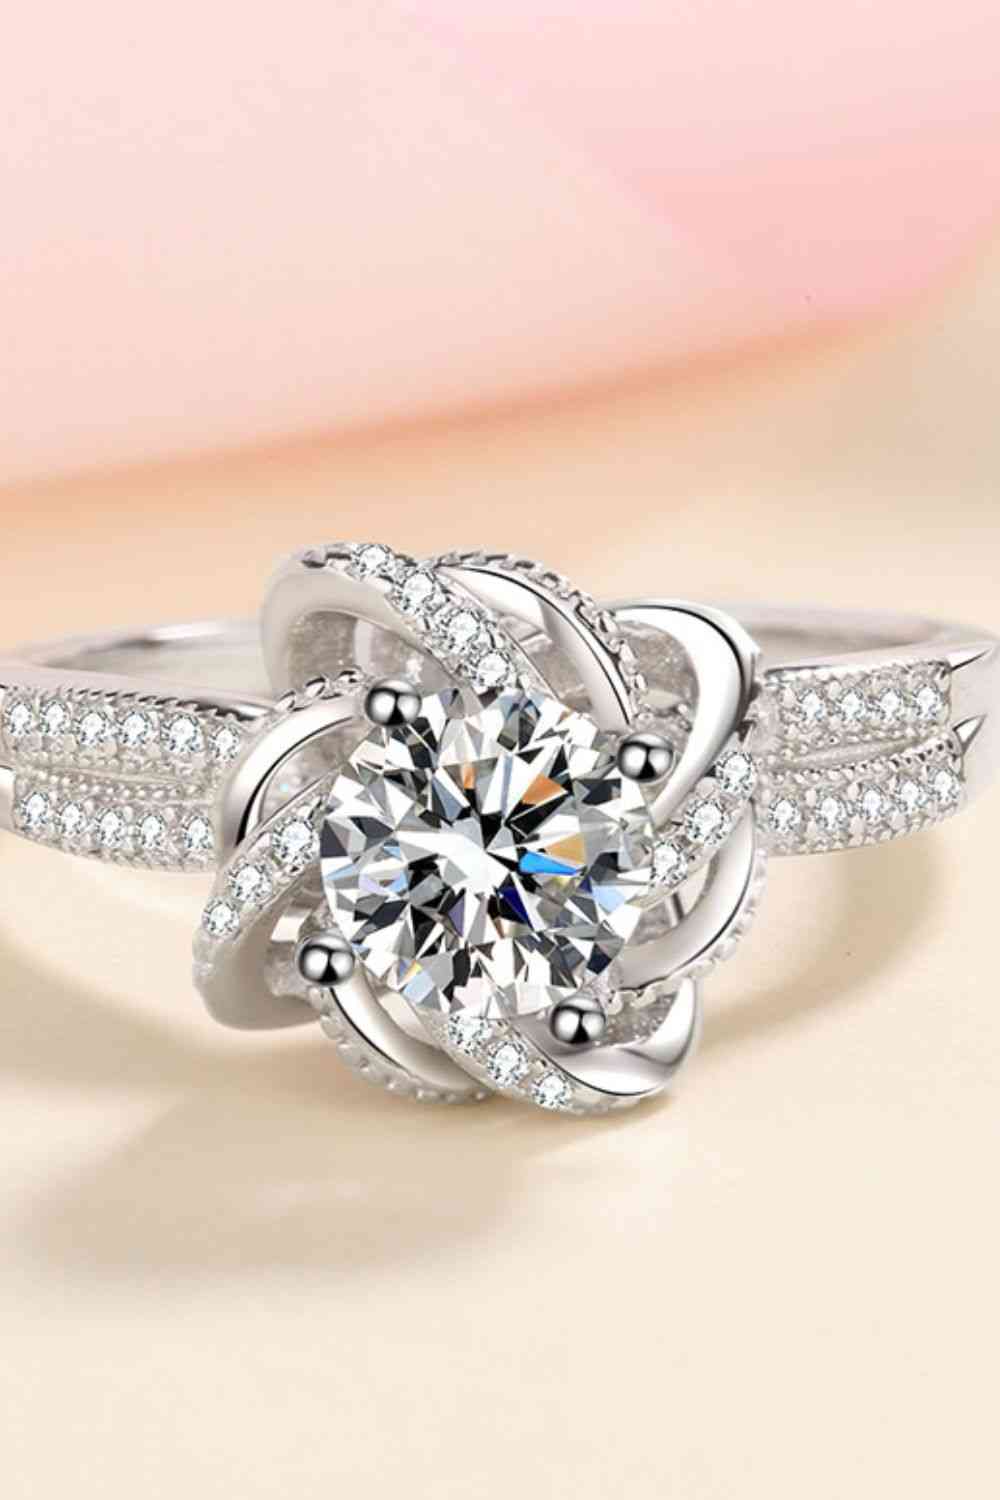 Ethereal Sparkle: 1 Carat Moissanite 925 Sterling Silver Ring